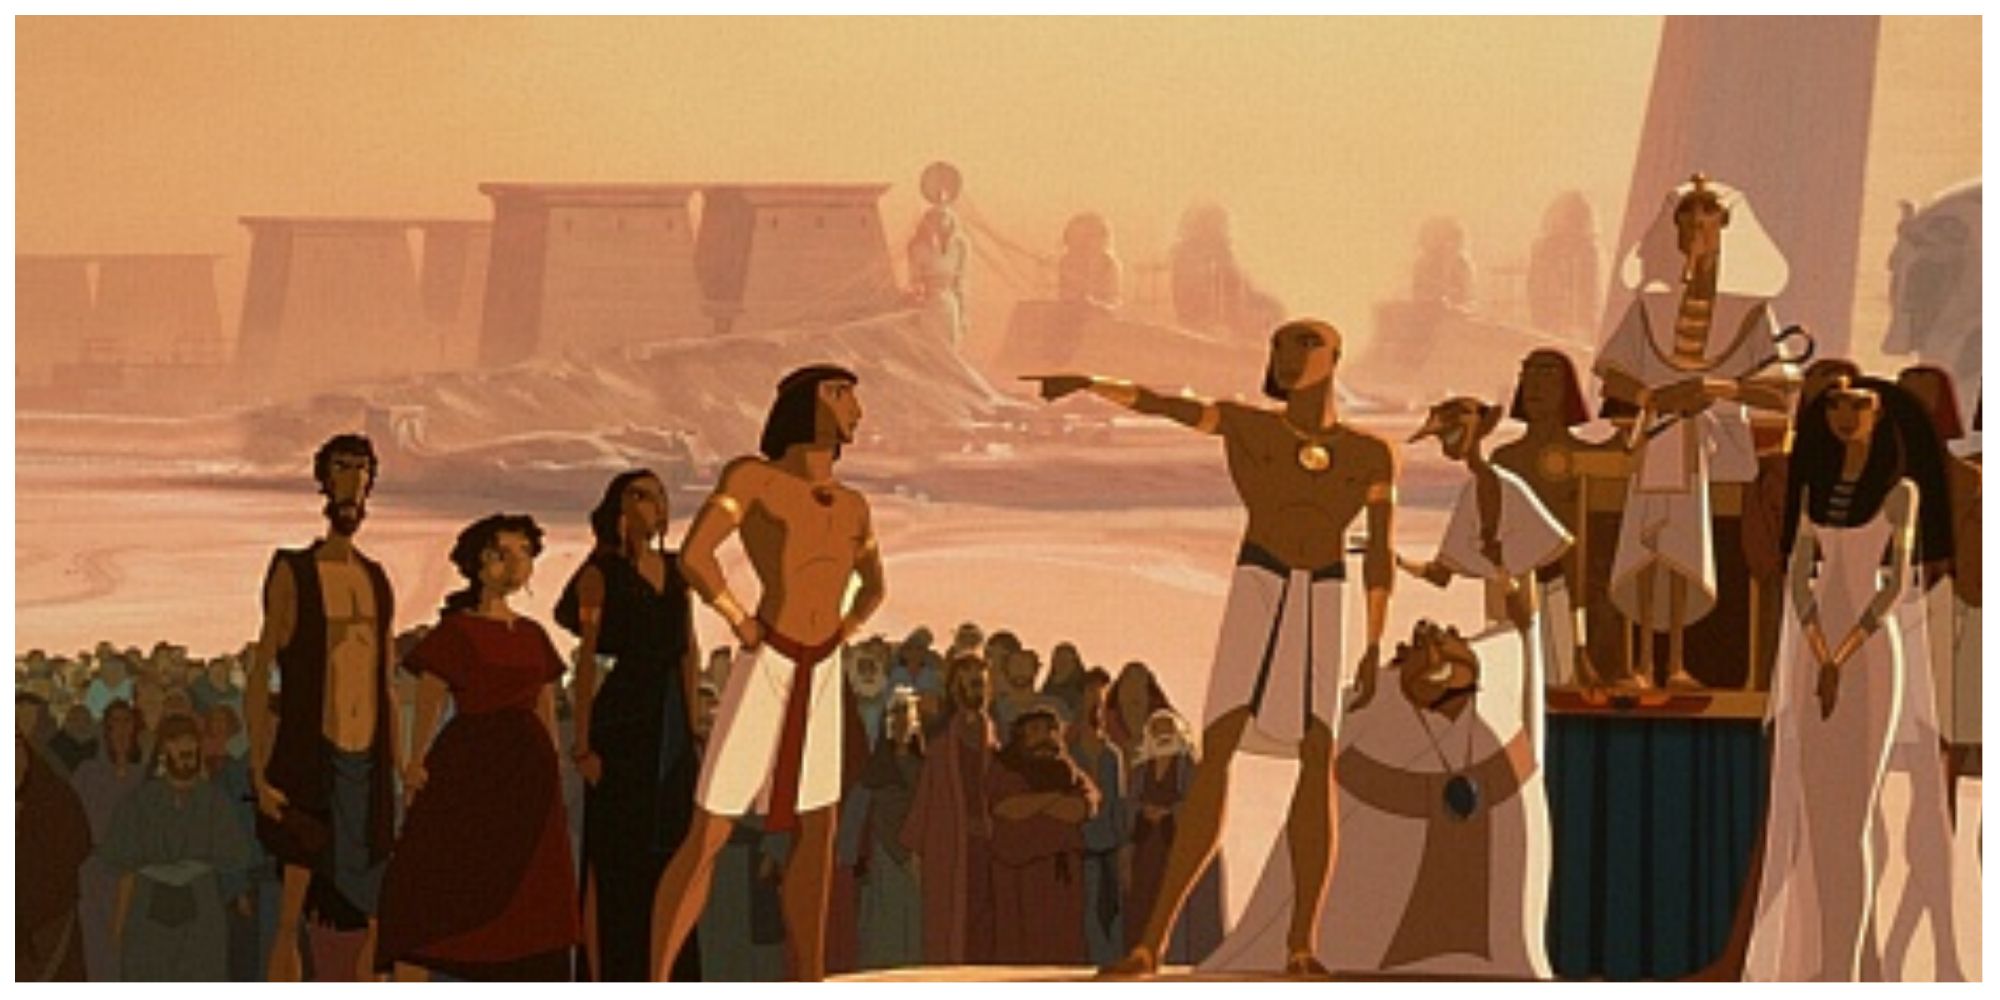 Moses in DreamWorks' Prince of Egypt.